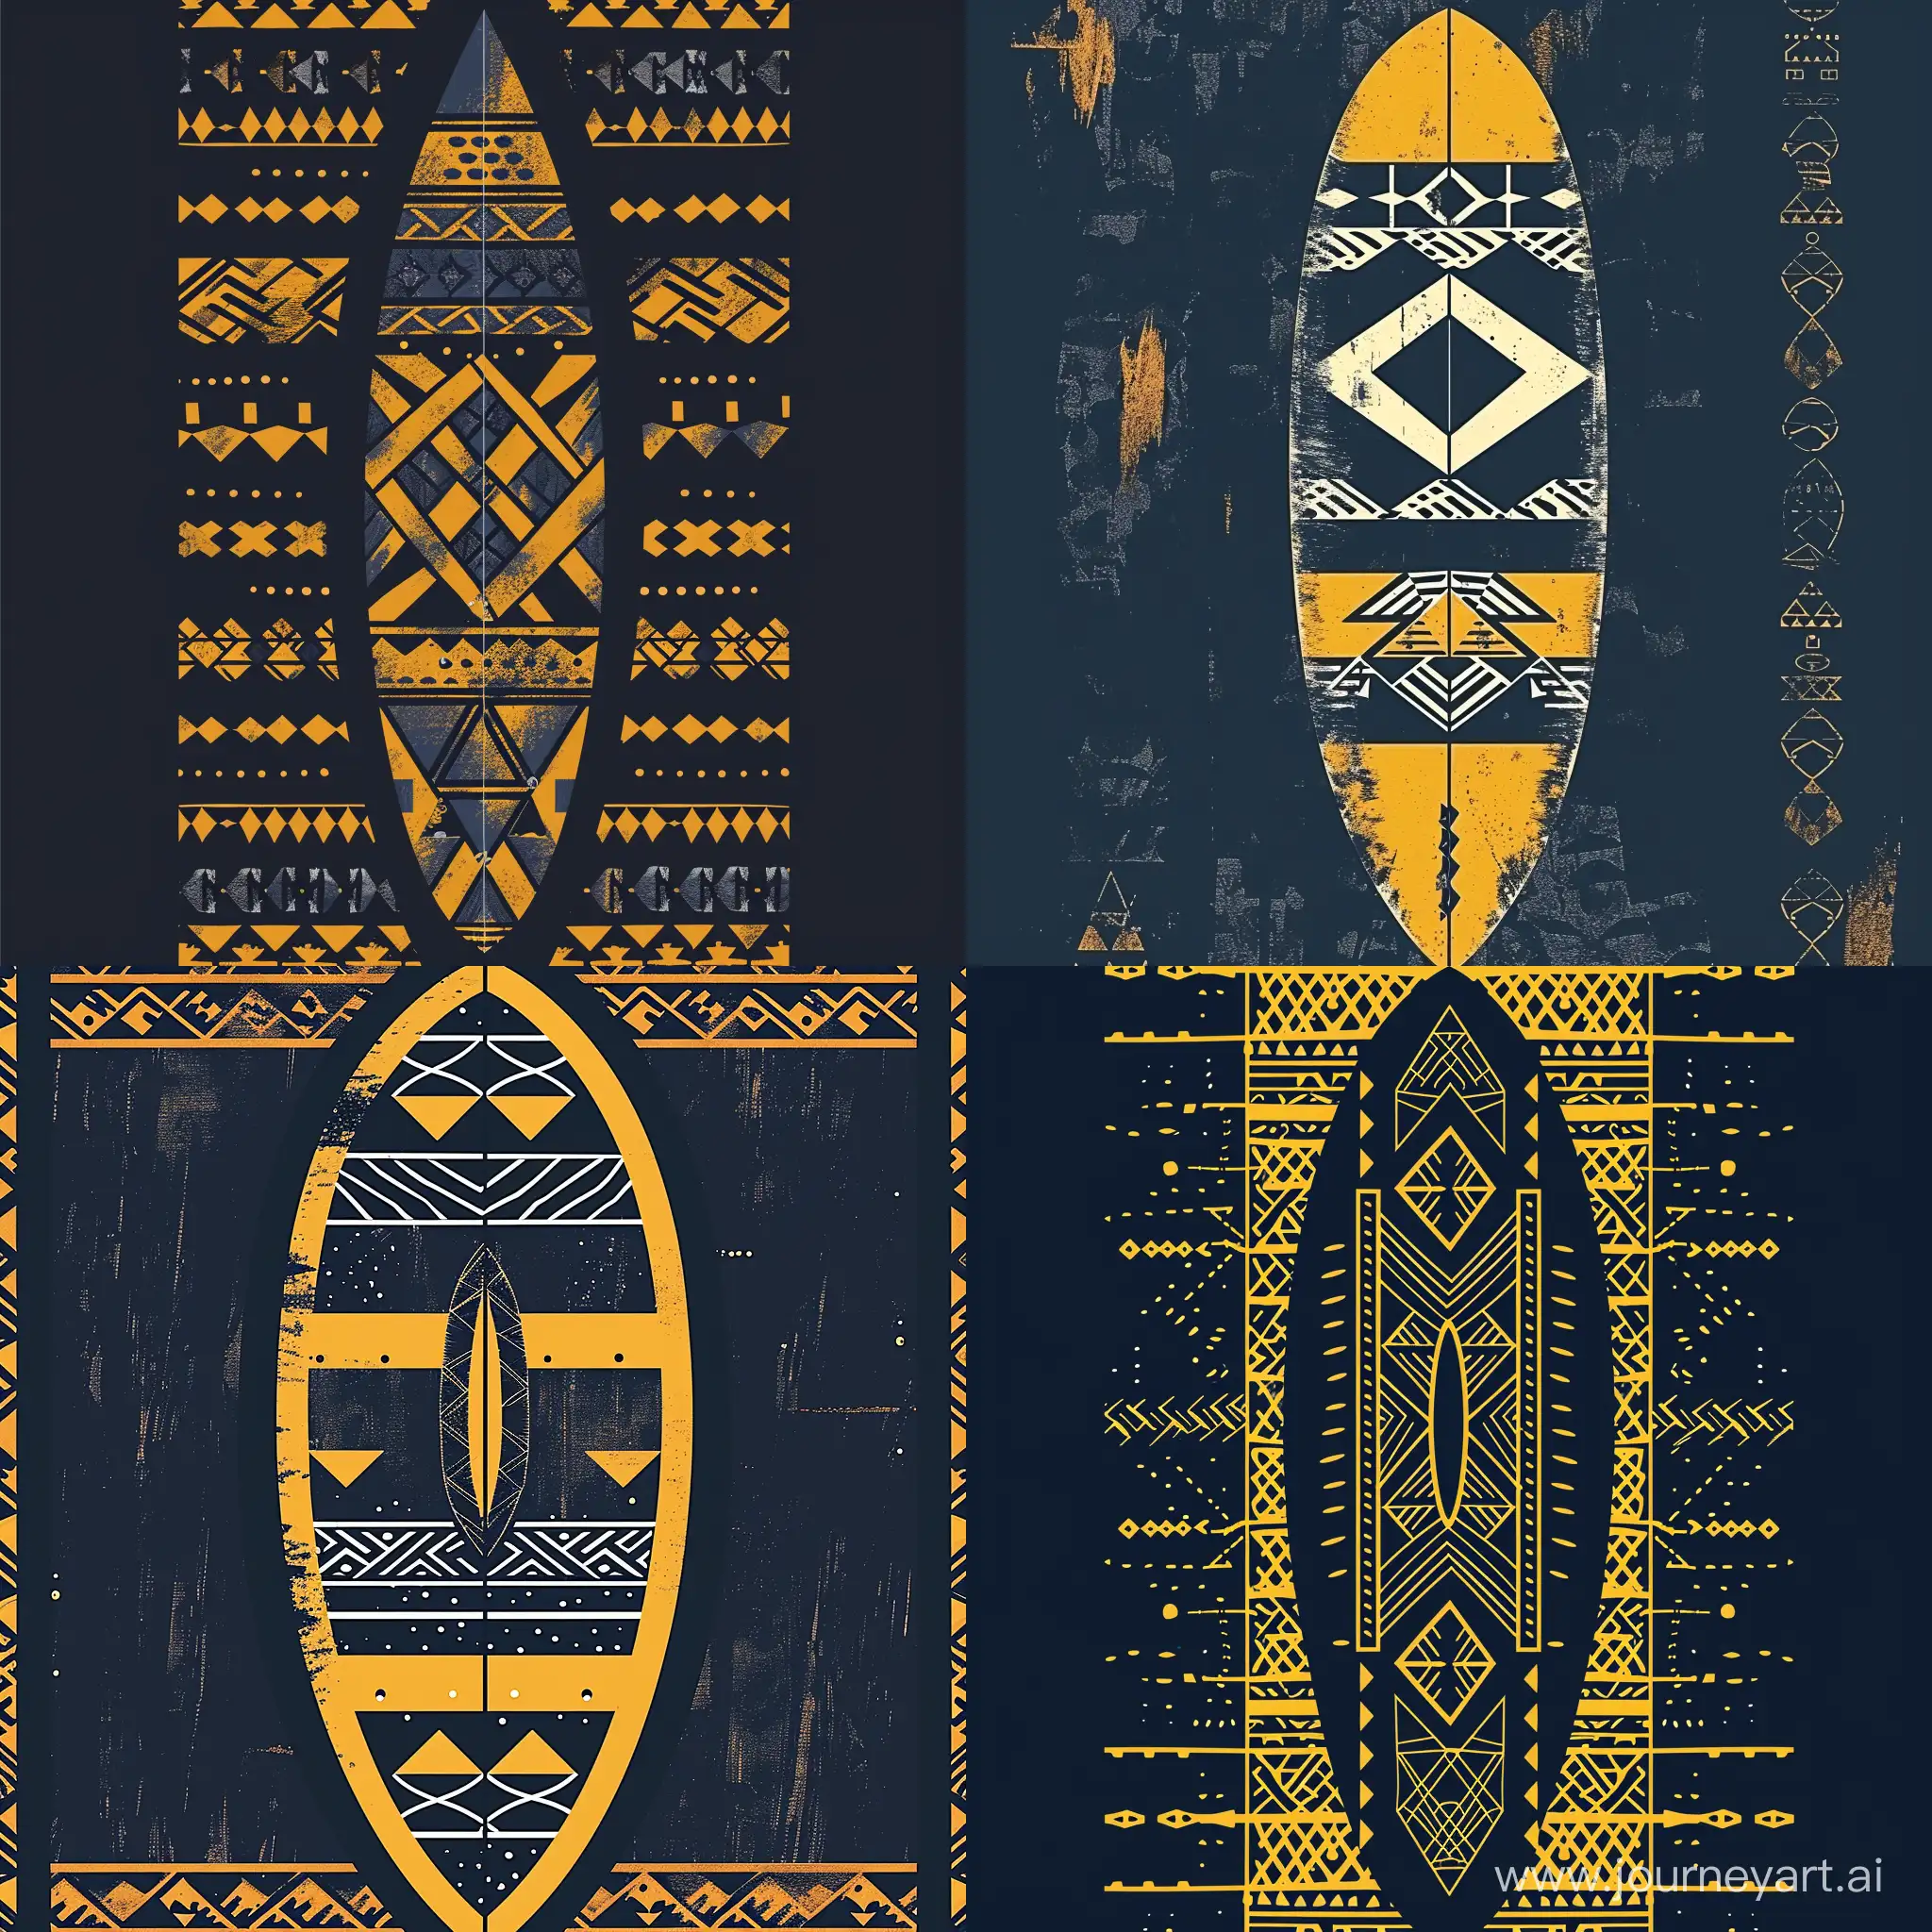 Abstract-AfricanInspired-Geometric-Surfboard-Design-in-Navy-and-Yellow